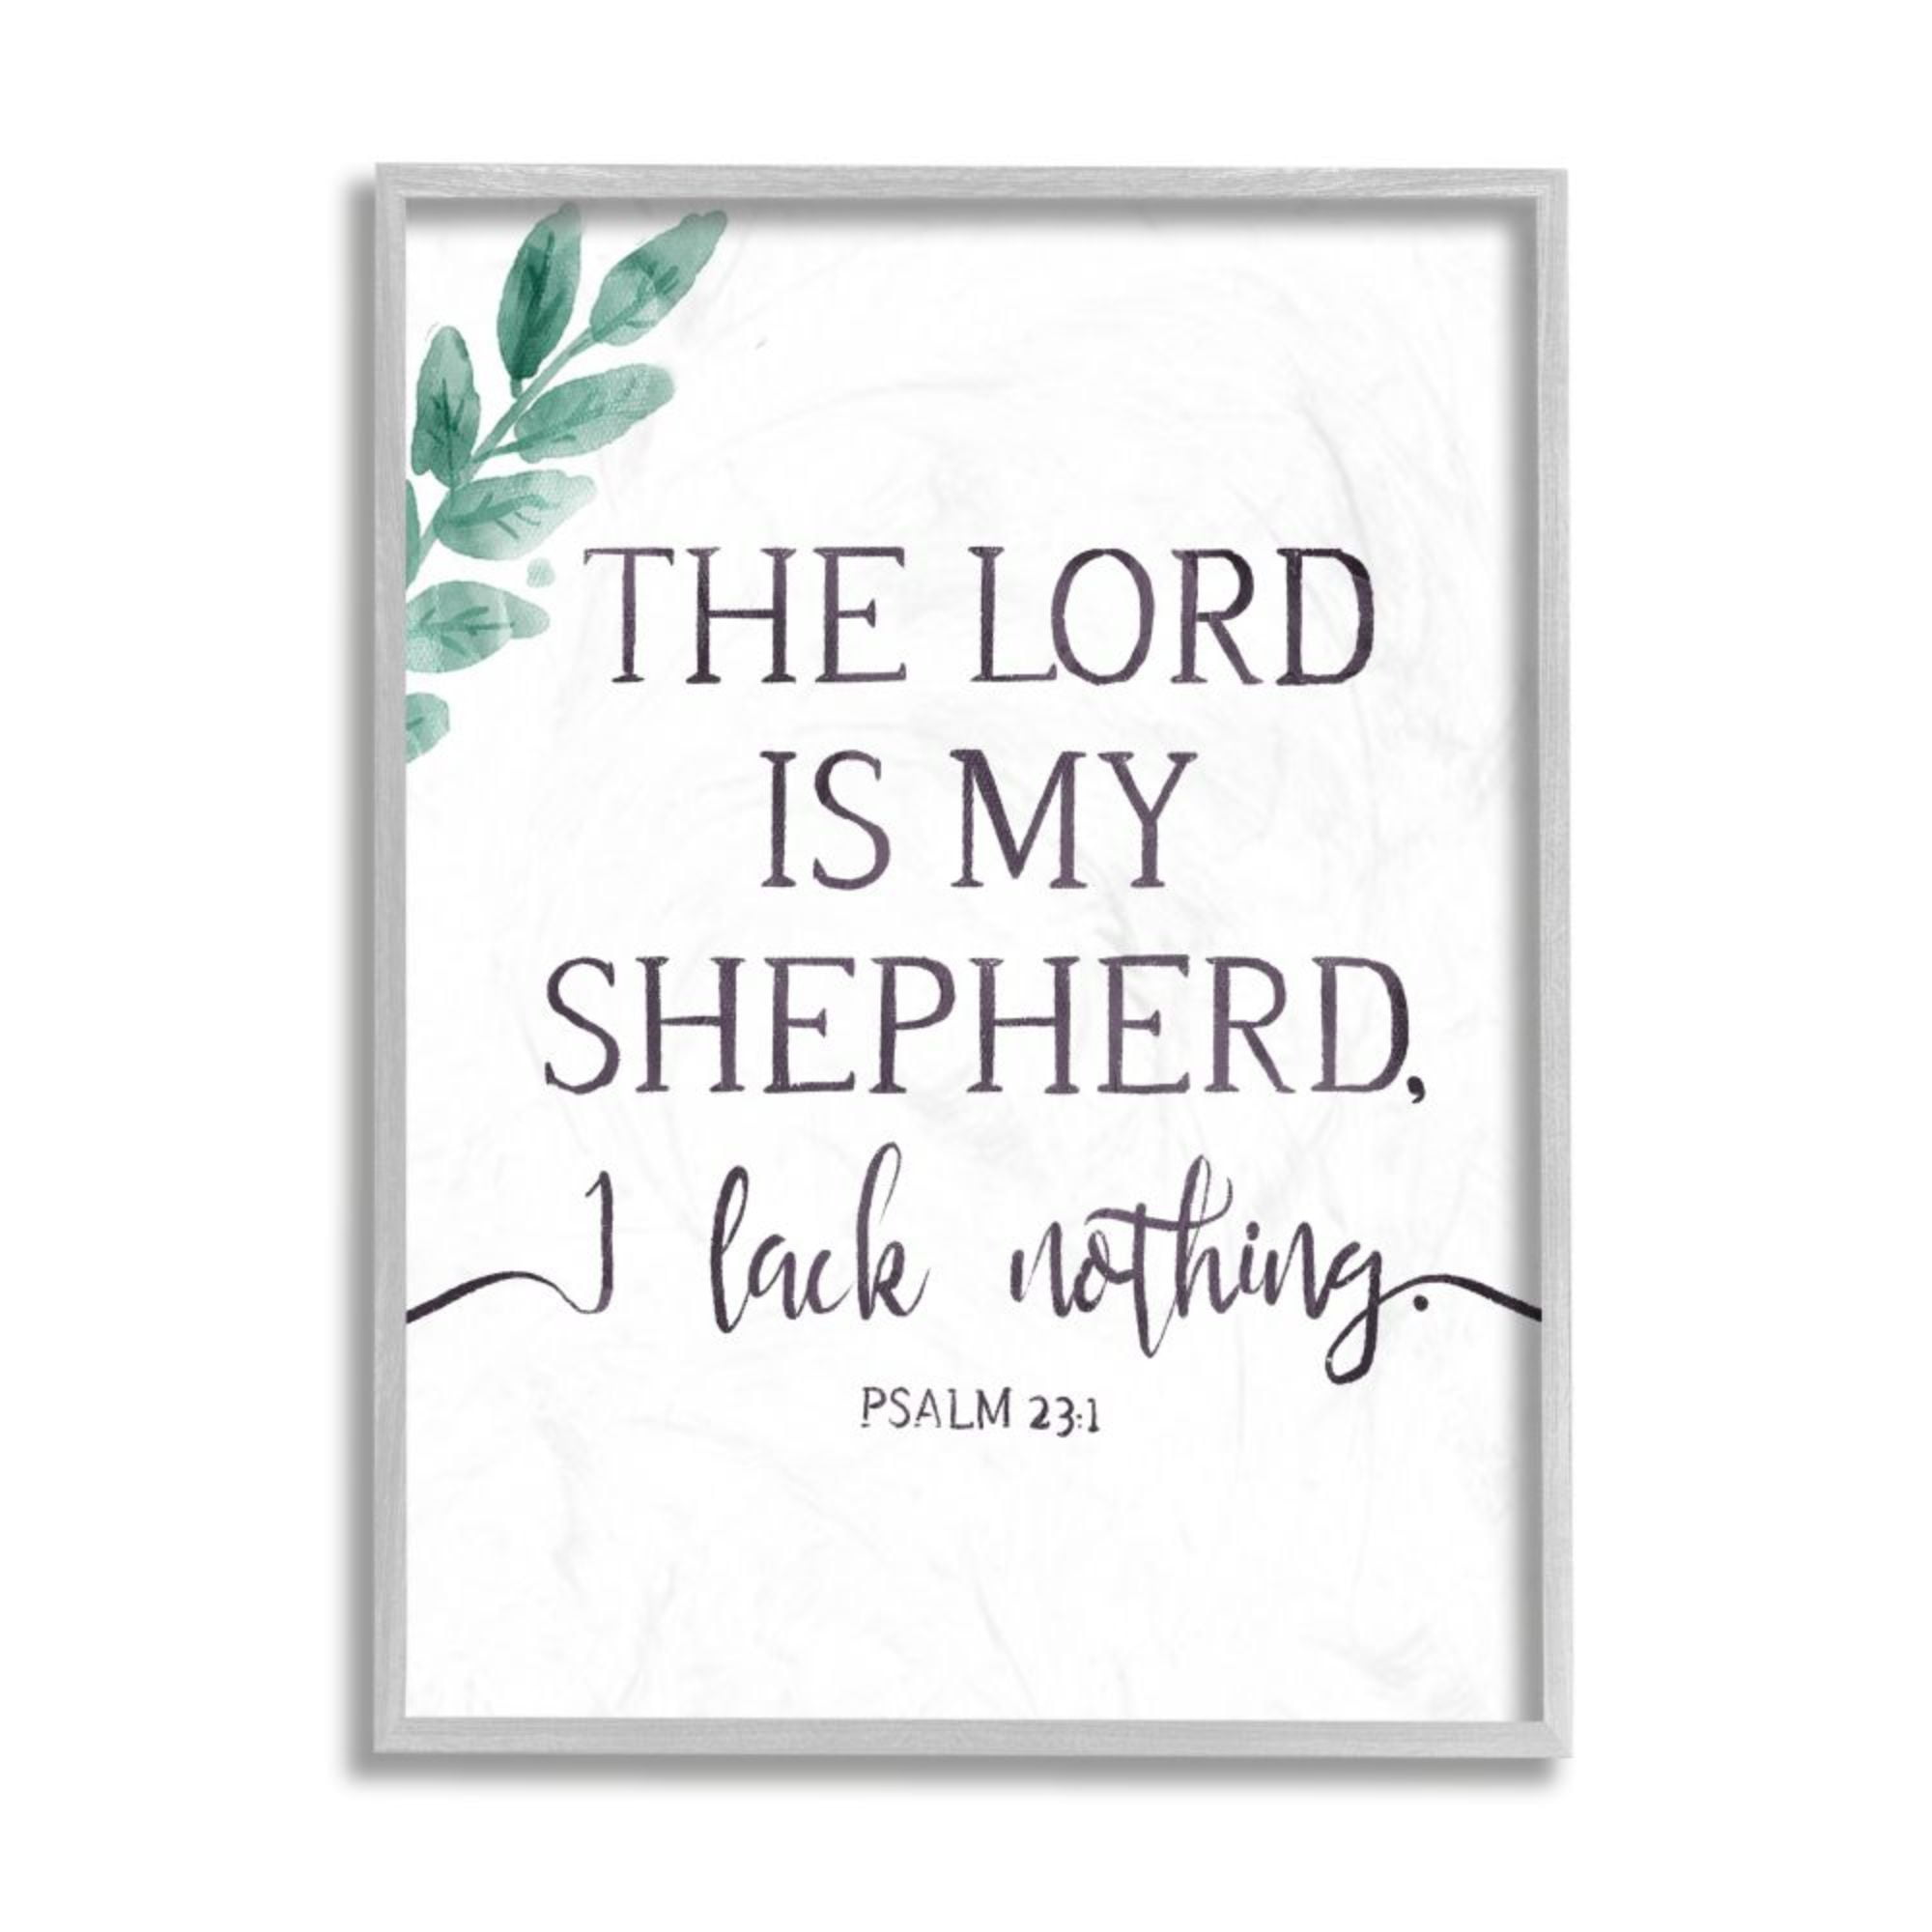 7 x 17 Stupell Industries Lord is My Shepherd Faith Quote Spring Florals Wood Art by Onrei Wall Plaque 